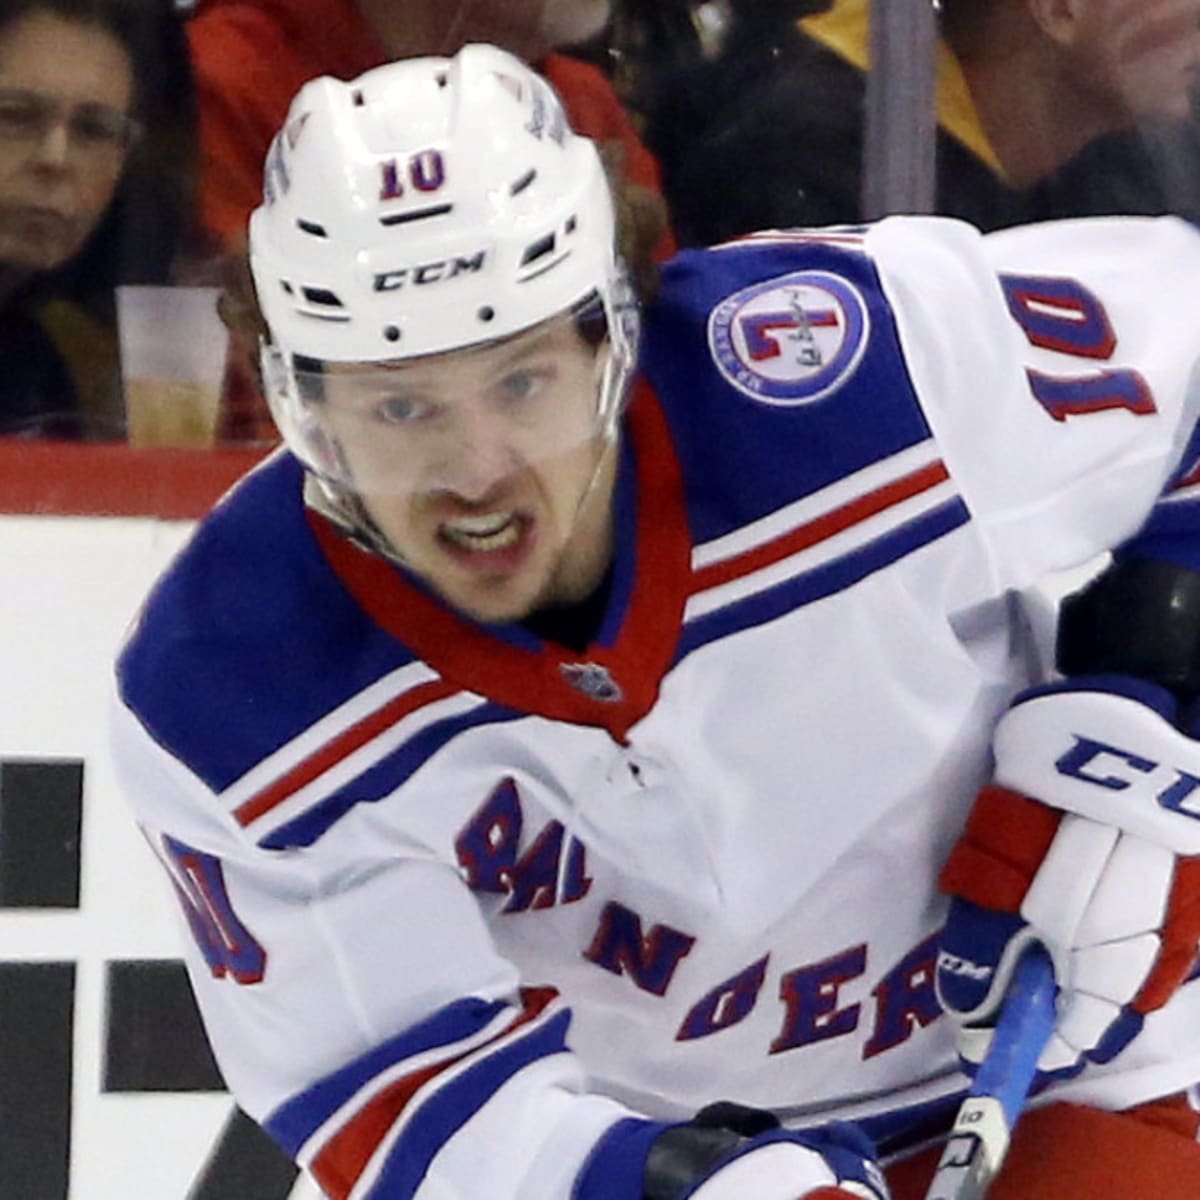 Rangers beat Bruins 4-0 in Panarin's first game back